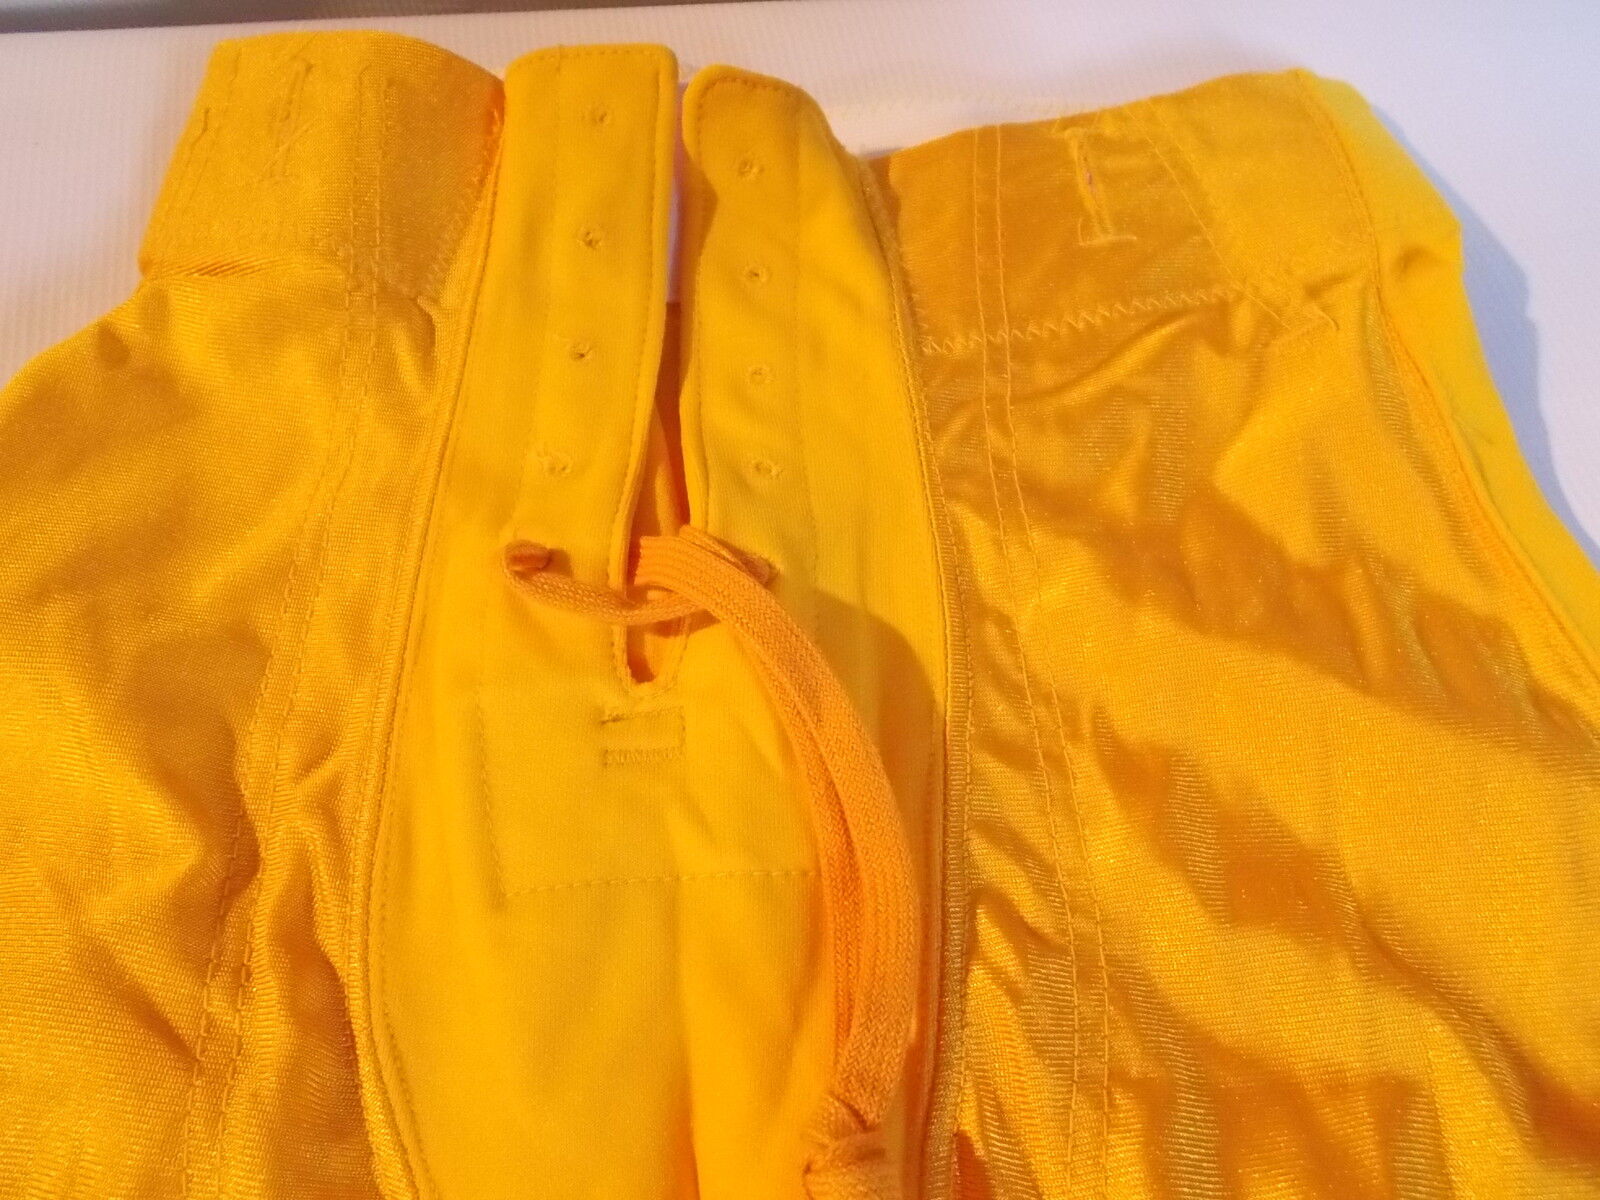  NEW YELLOW YOUTH FOOTBALL PANTS,,SMALL,MADE IN  U.S.A,VINTAGE 80\'S